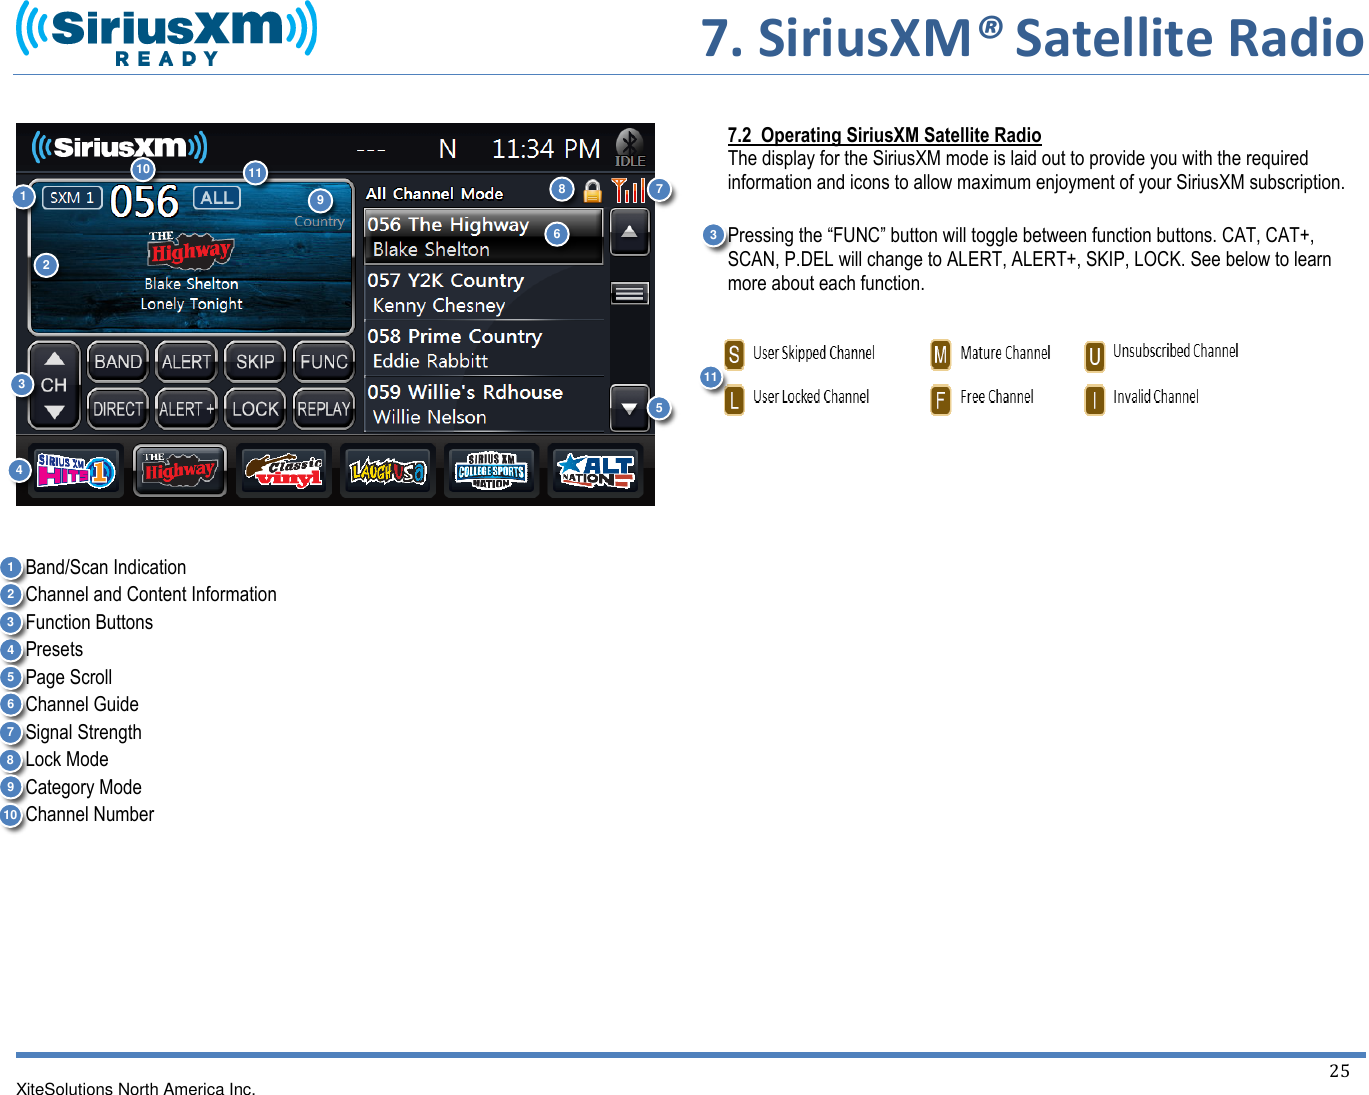     7. SiriusXM® Satellite Radio  XiteSolutions North America Inc.    25        Band/Scan Indication   Channel and Content Information   Function Buttons   Presets   Page Scroll   Channel Guide   Signal Strength   Lock Mode   Category Mode   Channel Number           7.2  Operating SiriusXM Satellite Radio The display for the SiriusXM mode is laid out to provide you with the required information and icons to allow maximum enjoyment of your SiriusXM subscription.  Pressing the “FUNC” button will toggle between function buttons. CAT, CAT+, SCAN, P.DEL will change to ALERT, ALERT+, SKIP, LOCK. See below to learn more about each function.      8 9 10  4 1 2 3 5 11  3 6 7 5 7 1 2 3 4 11  6 8 9 10  